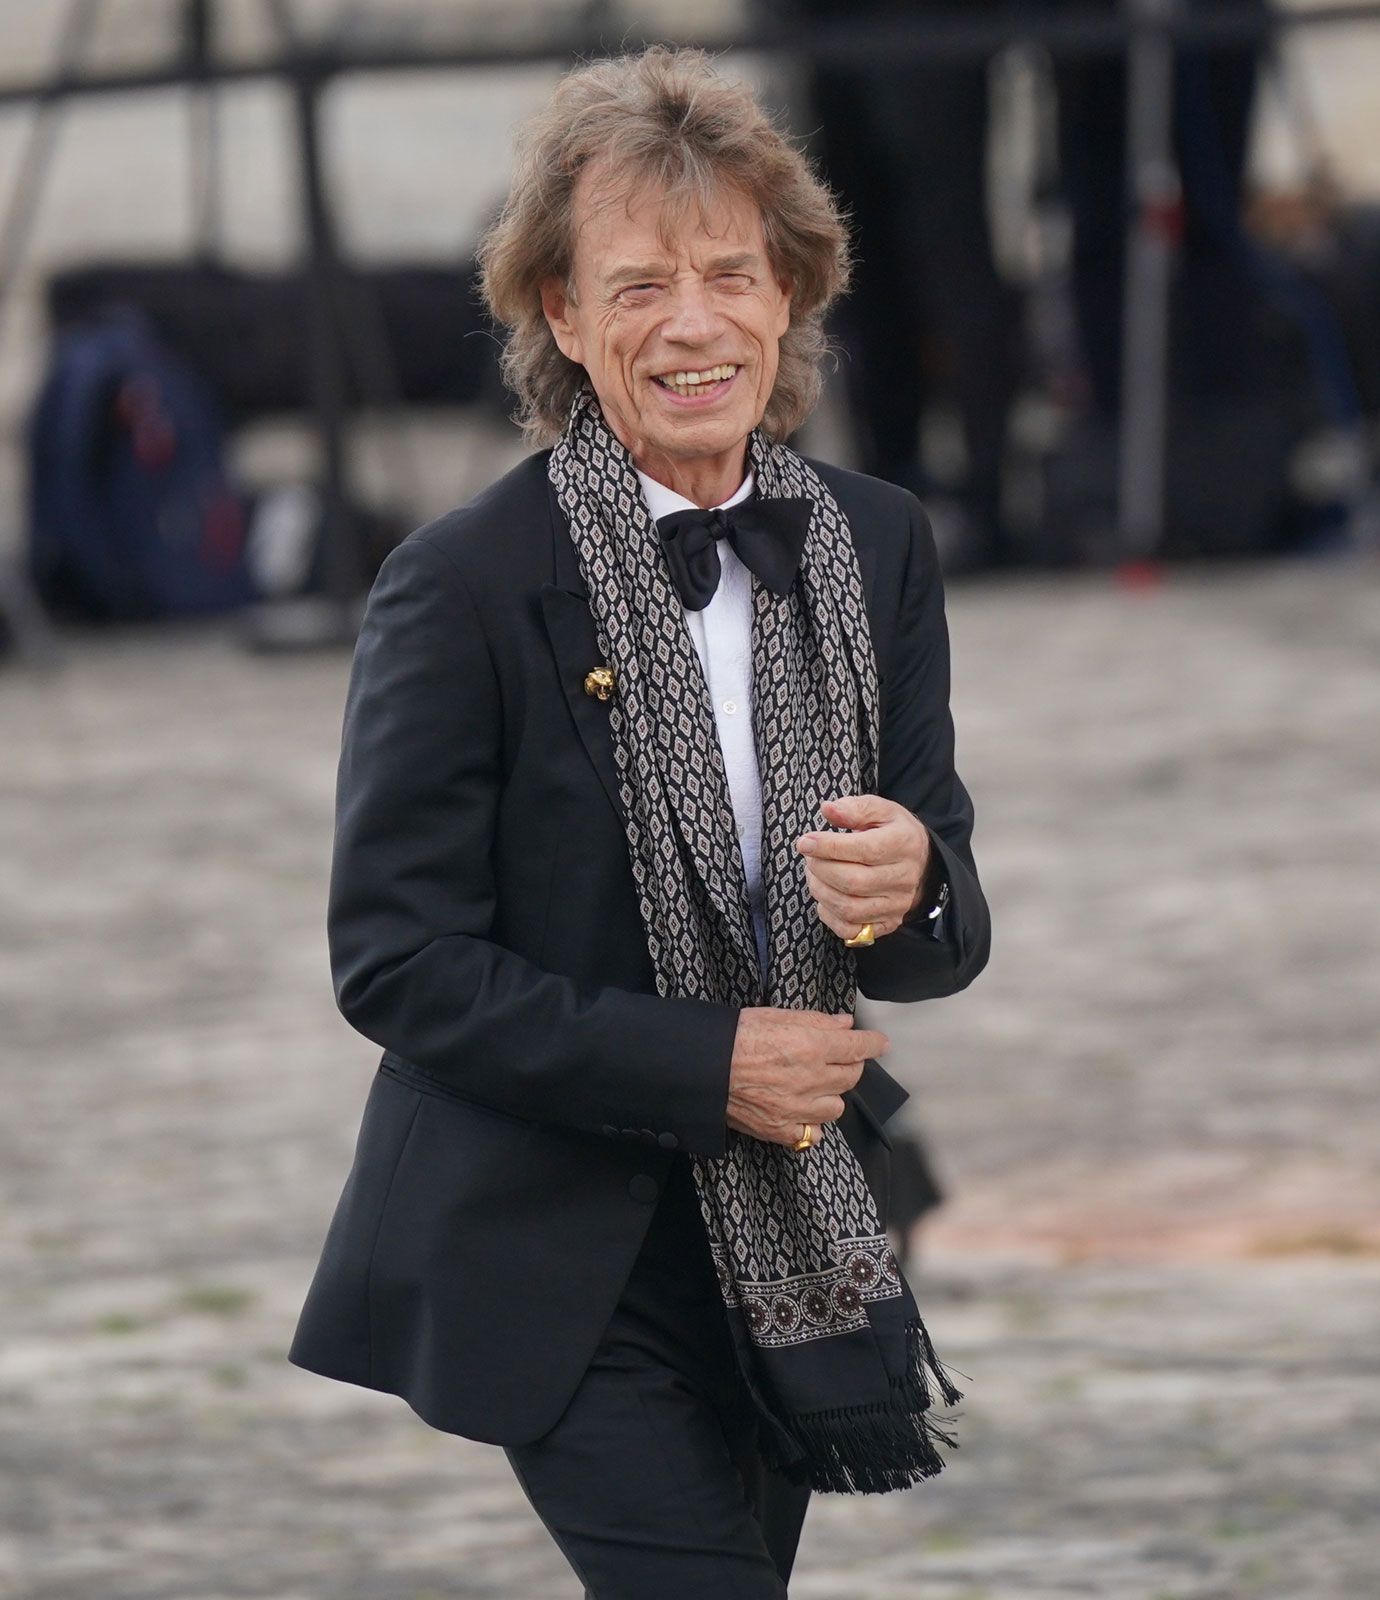 mick jagger images